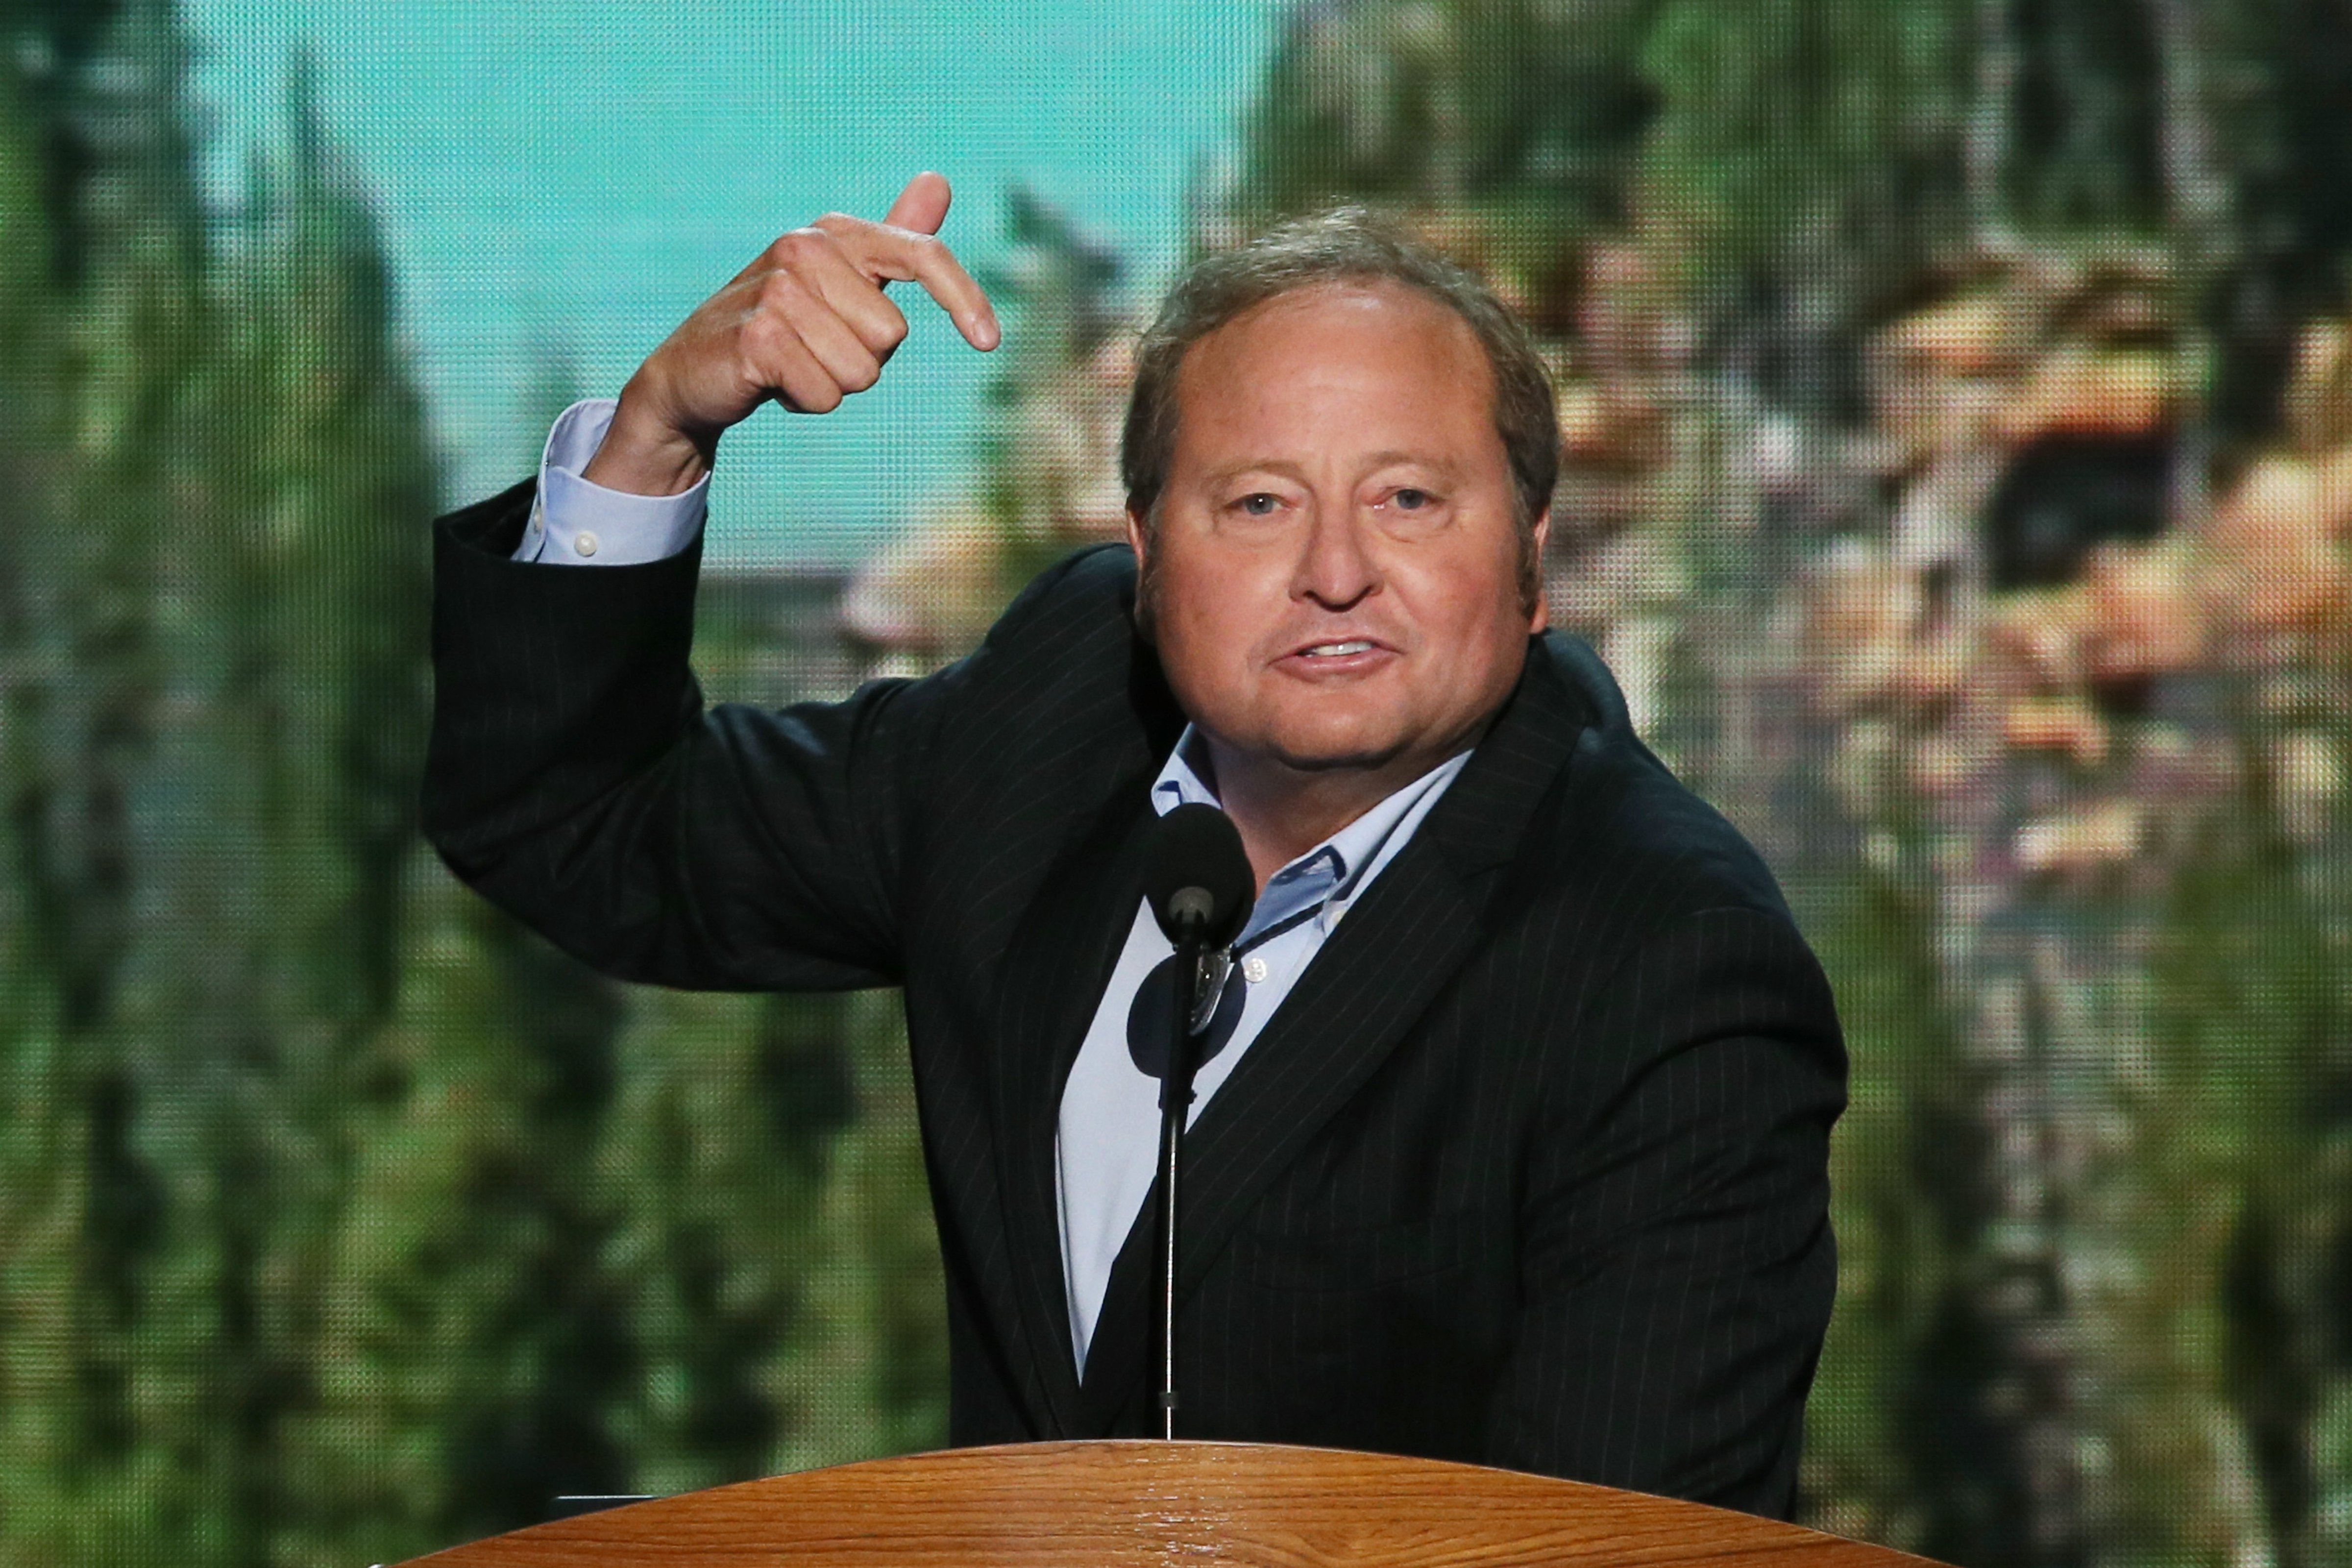 Then Montana Gov. Brian Schweitzer speaks on stage during the final day of the Democratic National Convention on September 6, 2012 in Charlotte, North Carolina. (Alex Wong—Getty Images)